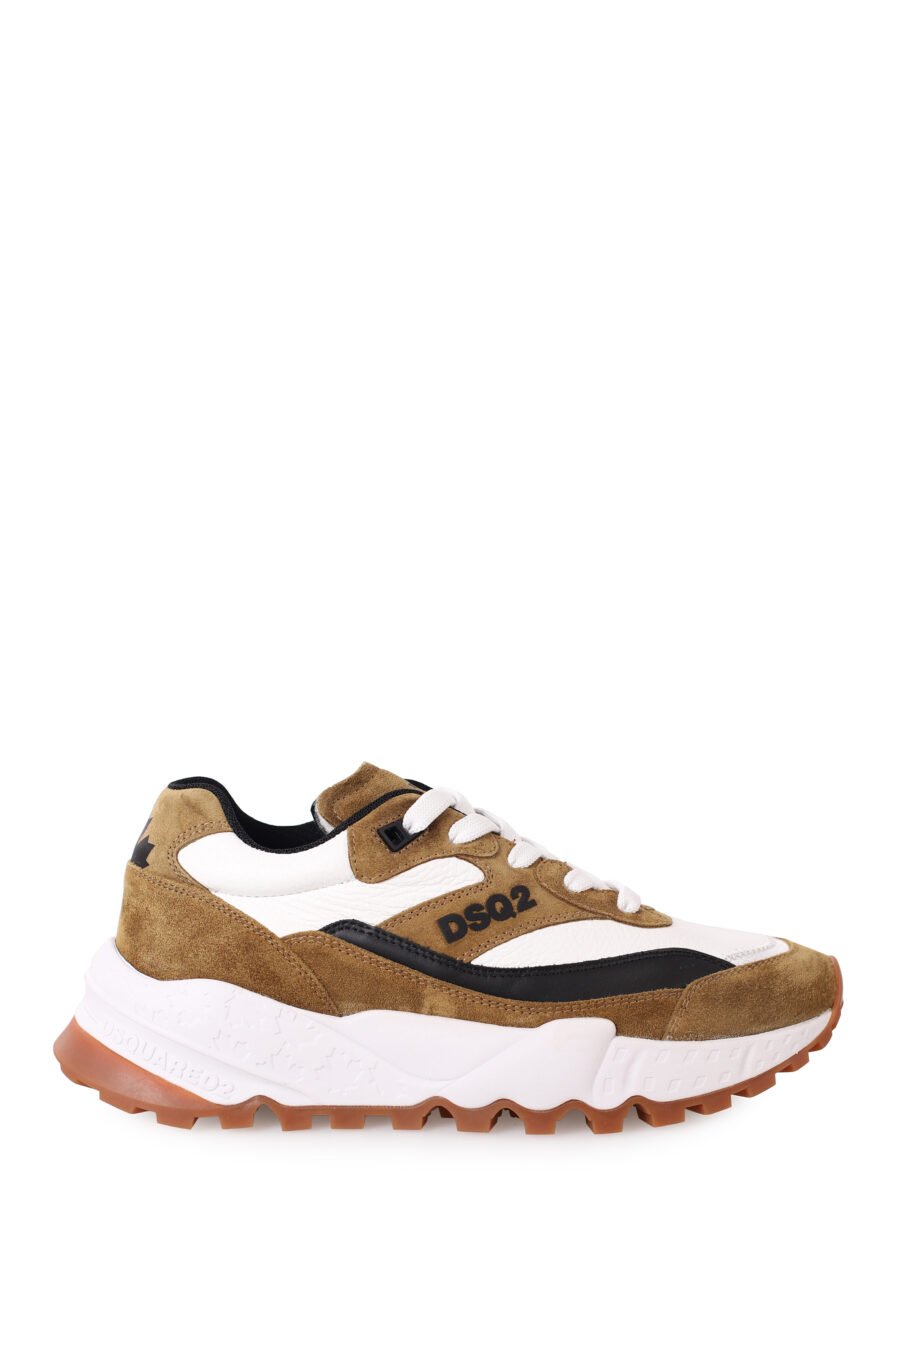 Camel coloured trainers with Dsq2" logo and black and white details - IMG 0361